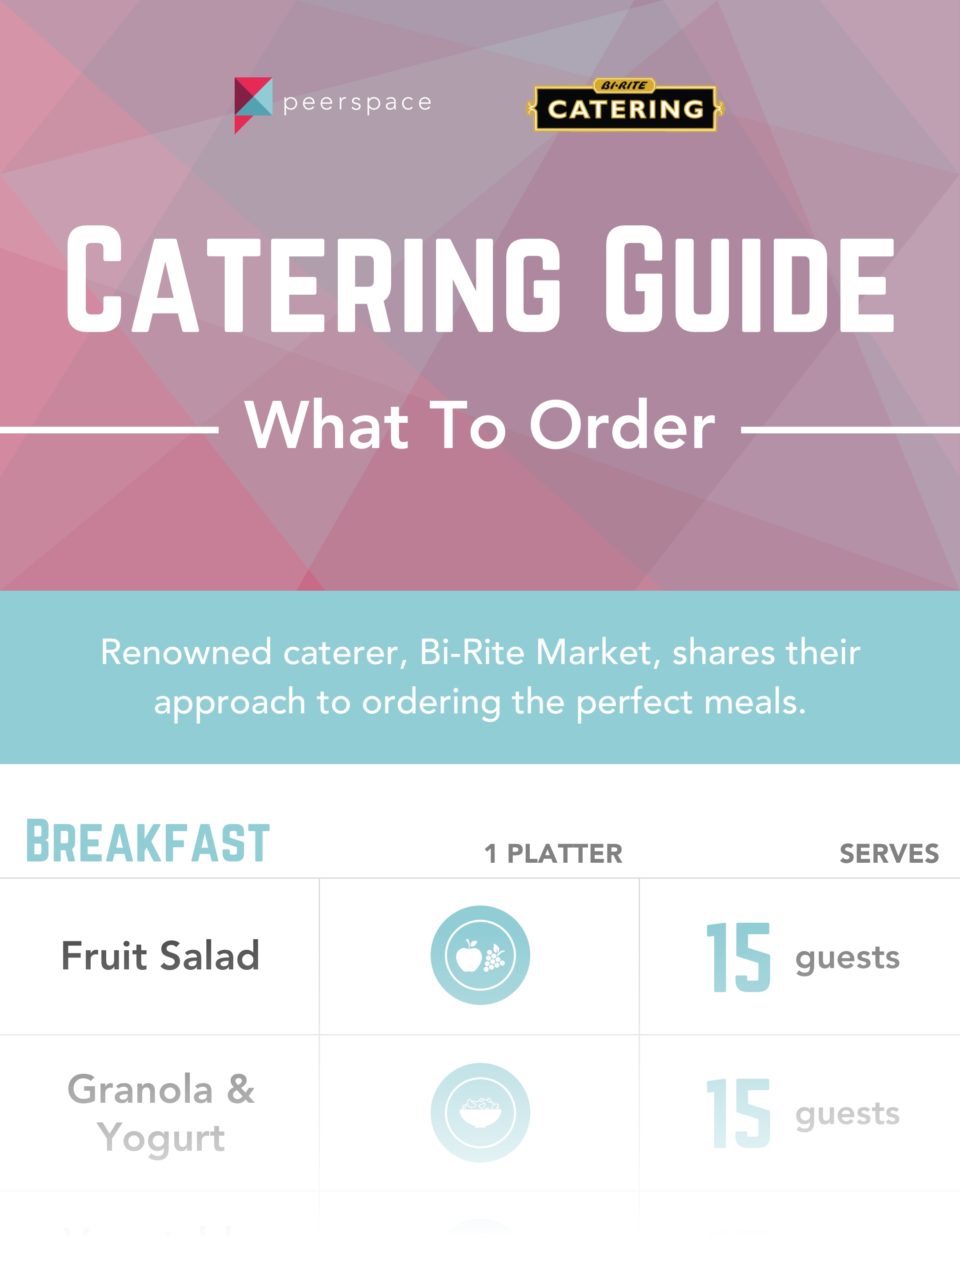 Catering Menu Ideas - What To Order